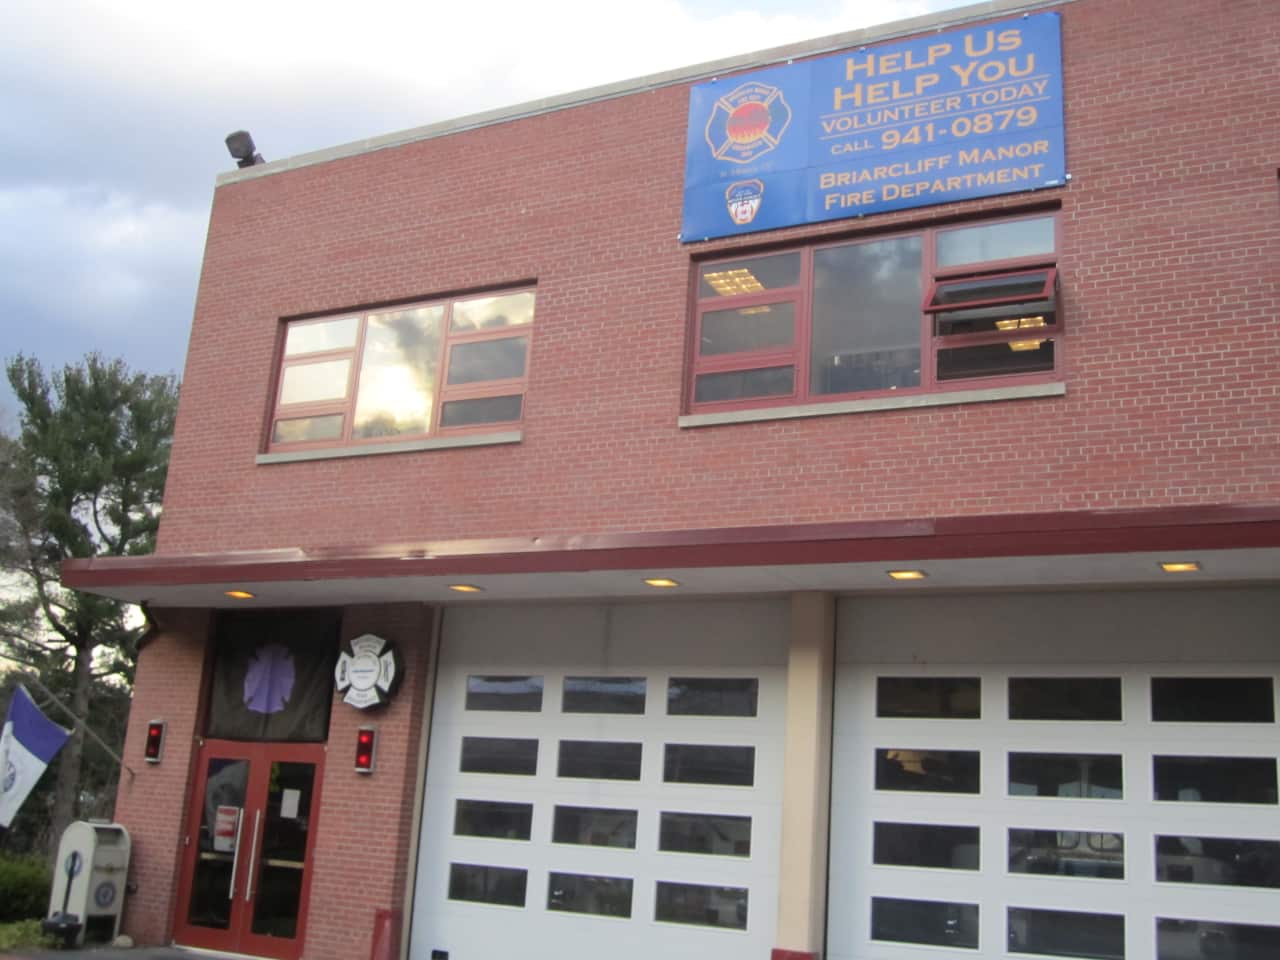 Briarcliff Manor Fire Department received a $167,451 grant from FEMA's Assistance to Firefighters Grant program. 